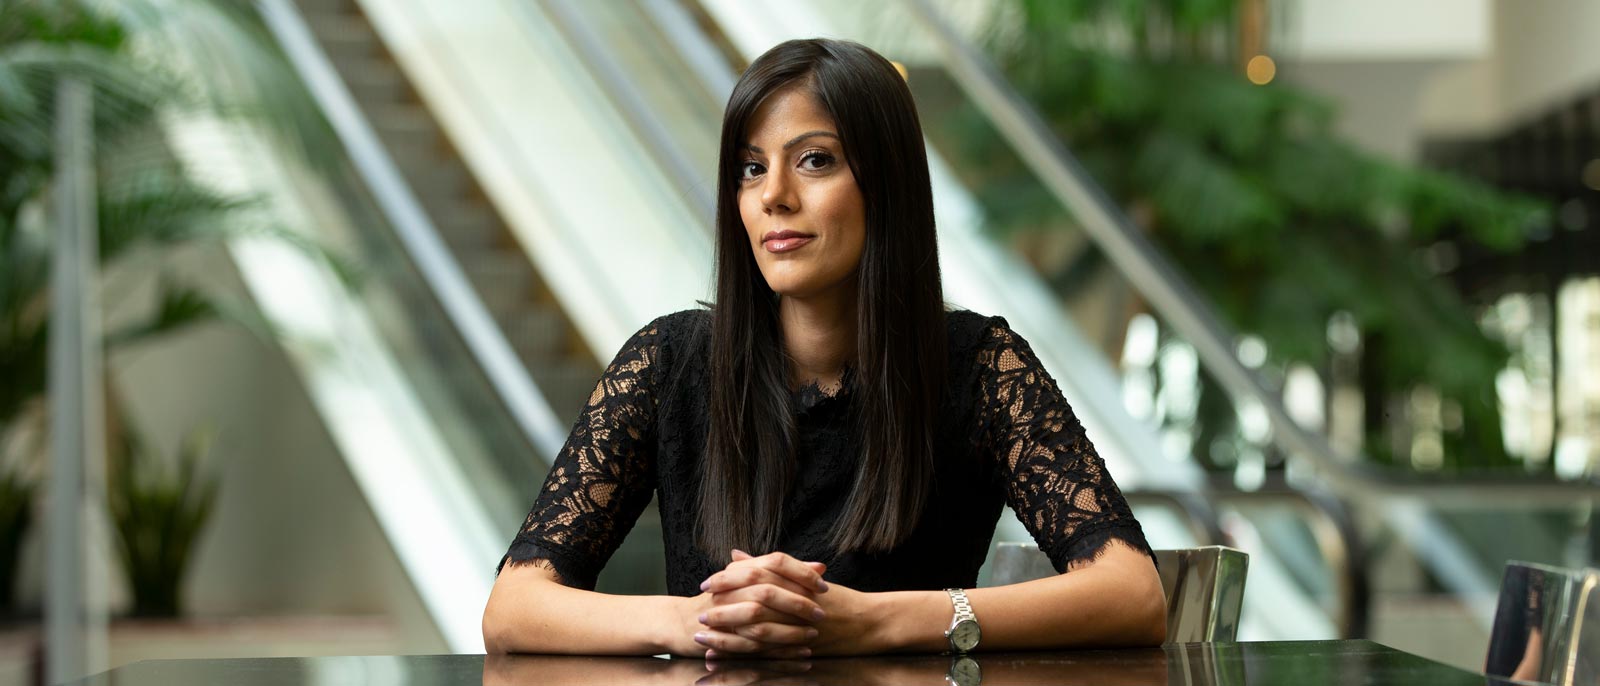 MSU Full-Time MBA alumnae Harprit Brar sits at a reflective metal table in an open atrium in East Lansing, Michigan.